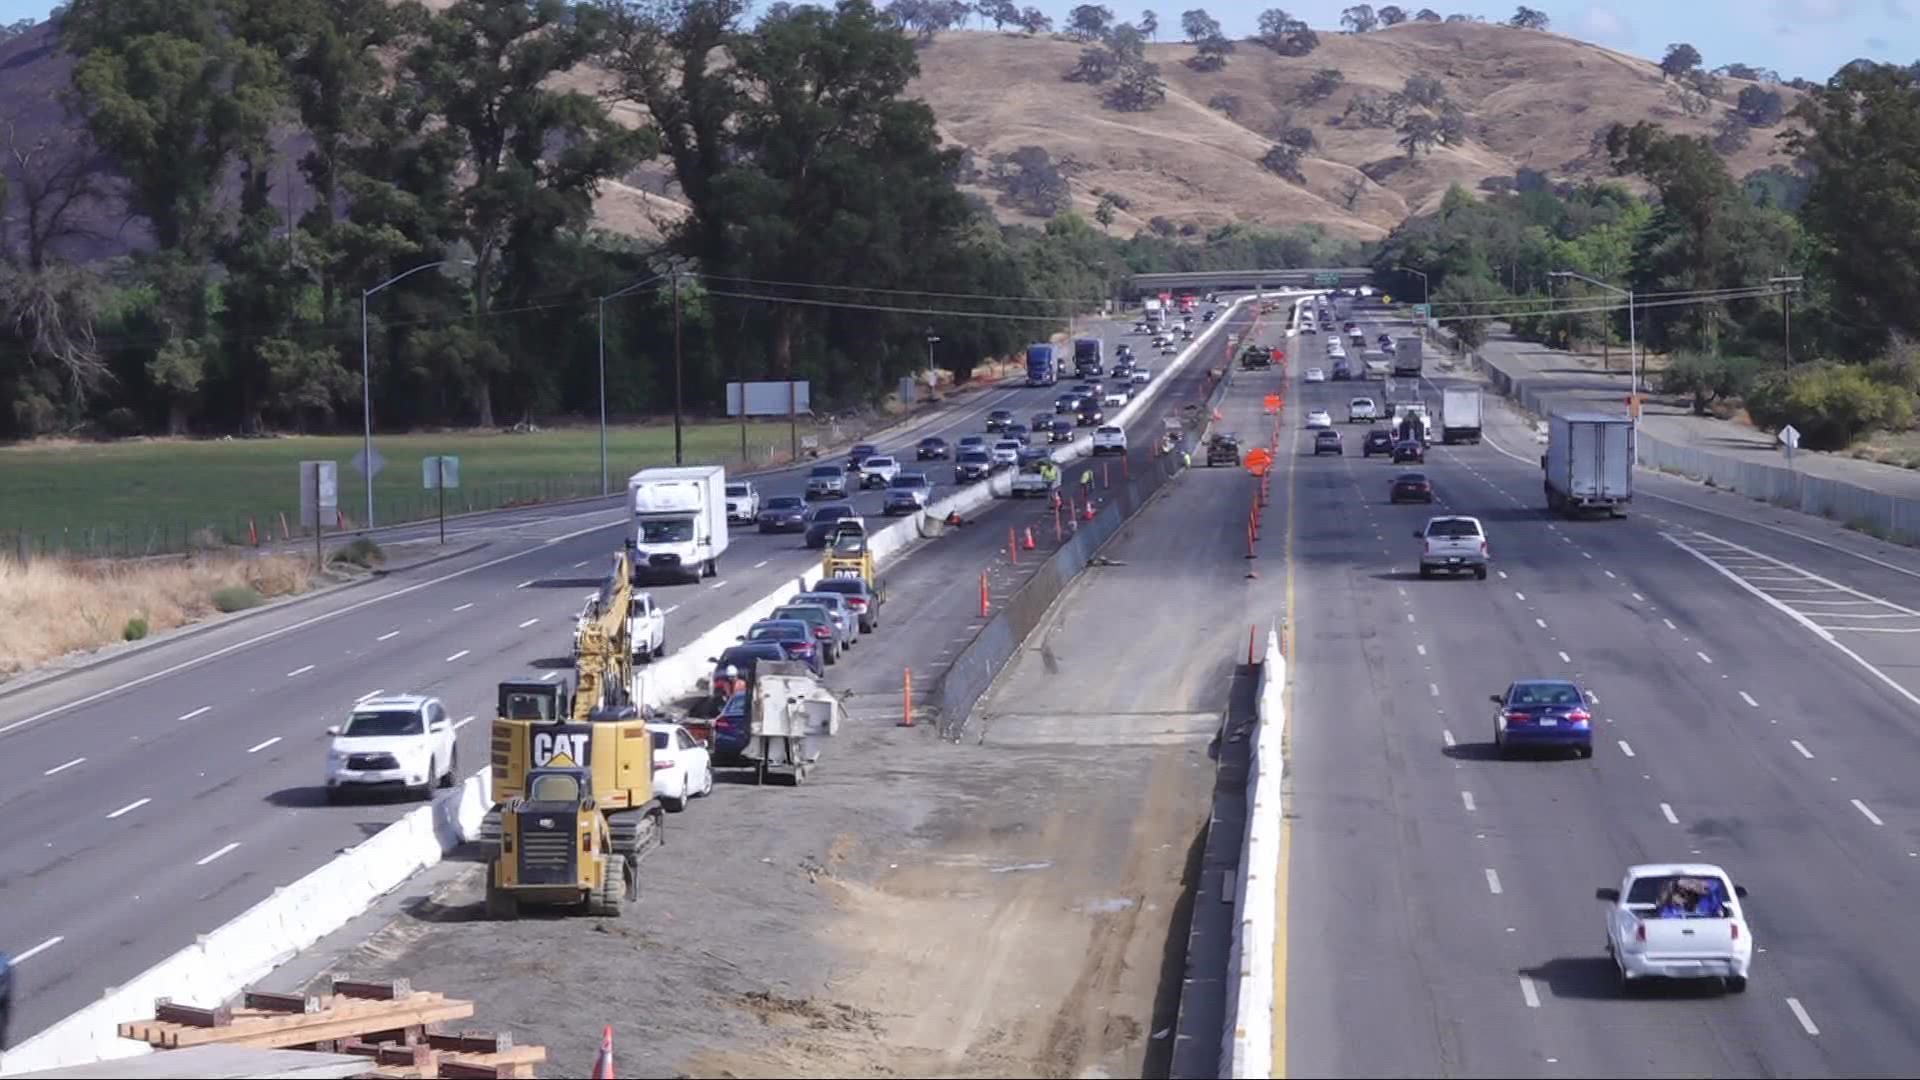 The three-year project will result in two new 18-mile express lanes, one eastbound and one westbound, through central Solano County.